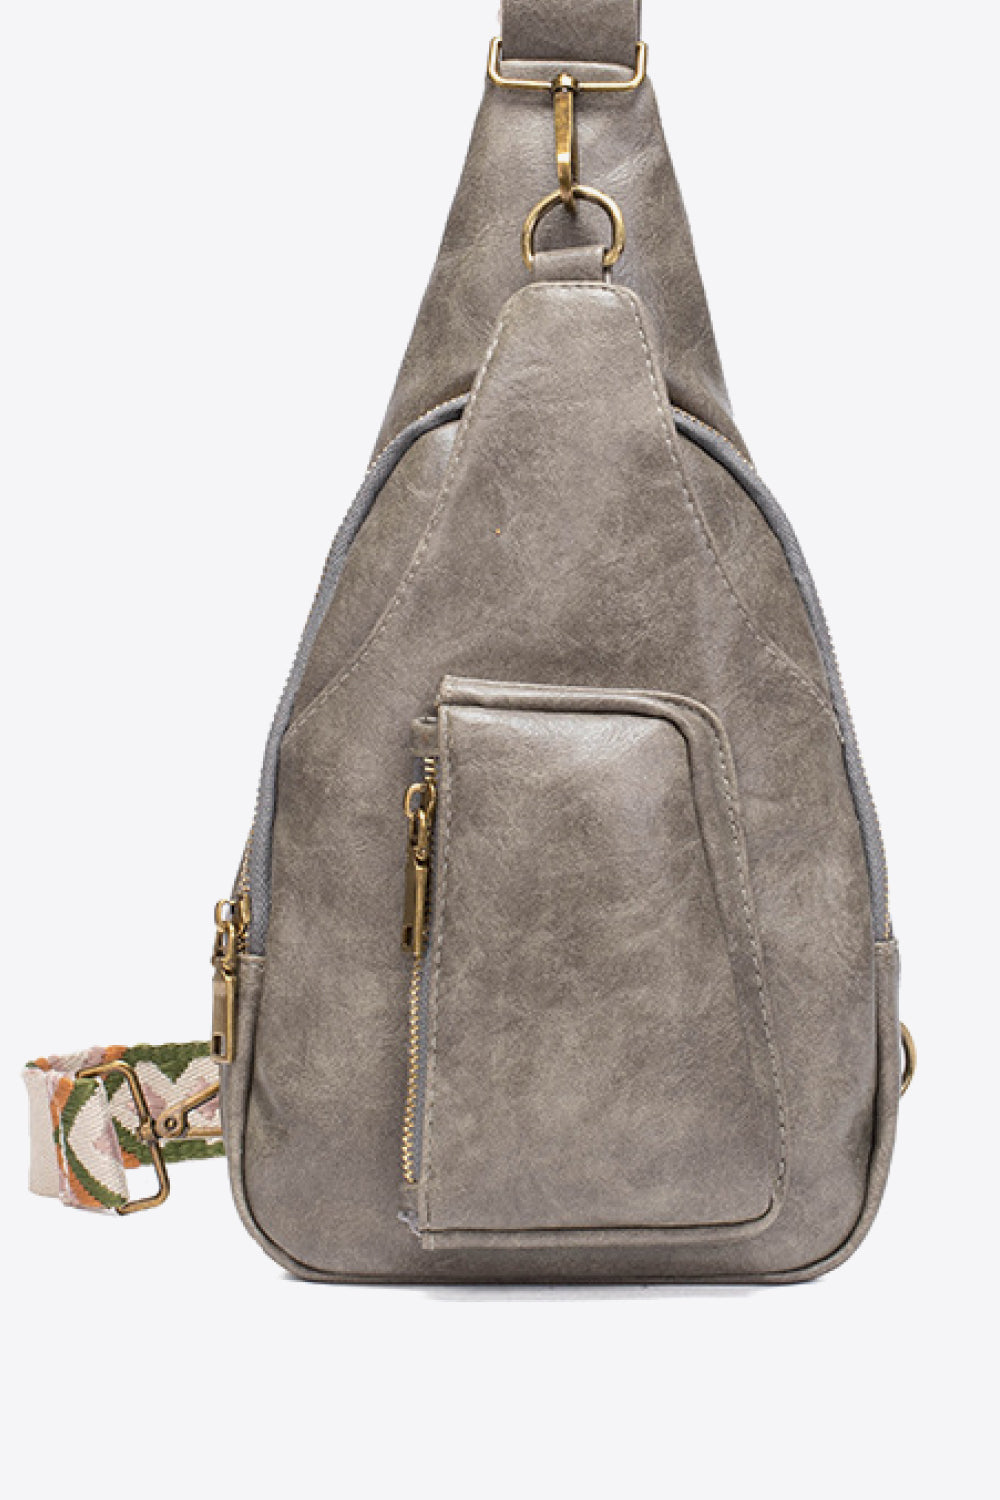 All The Feels PU Leather Sling Bag-Ever Joy